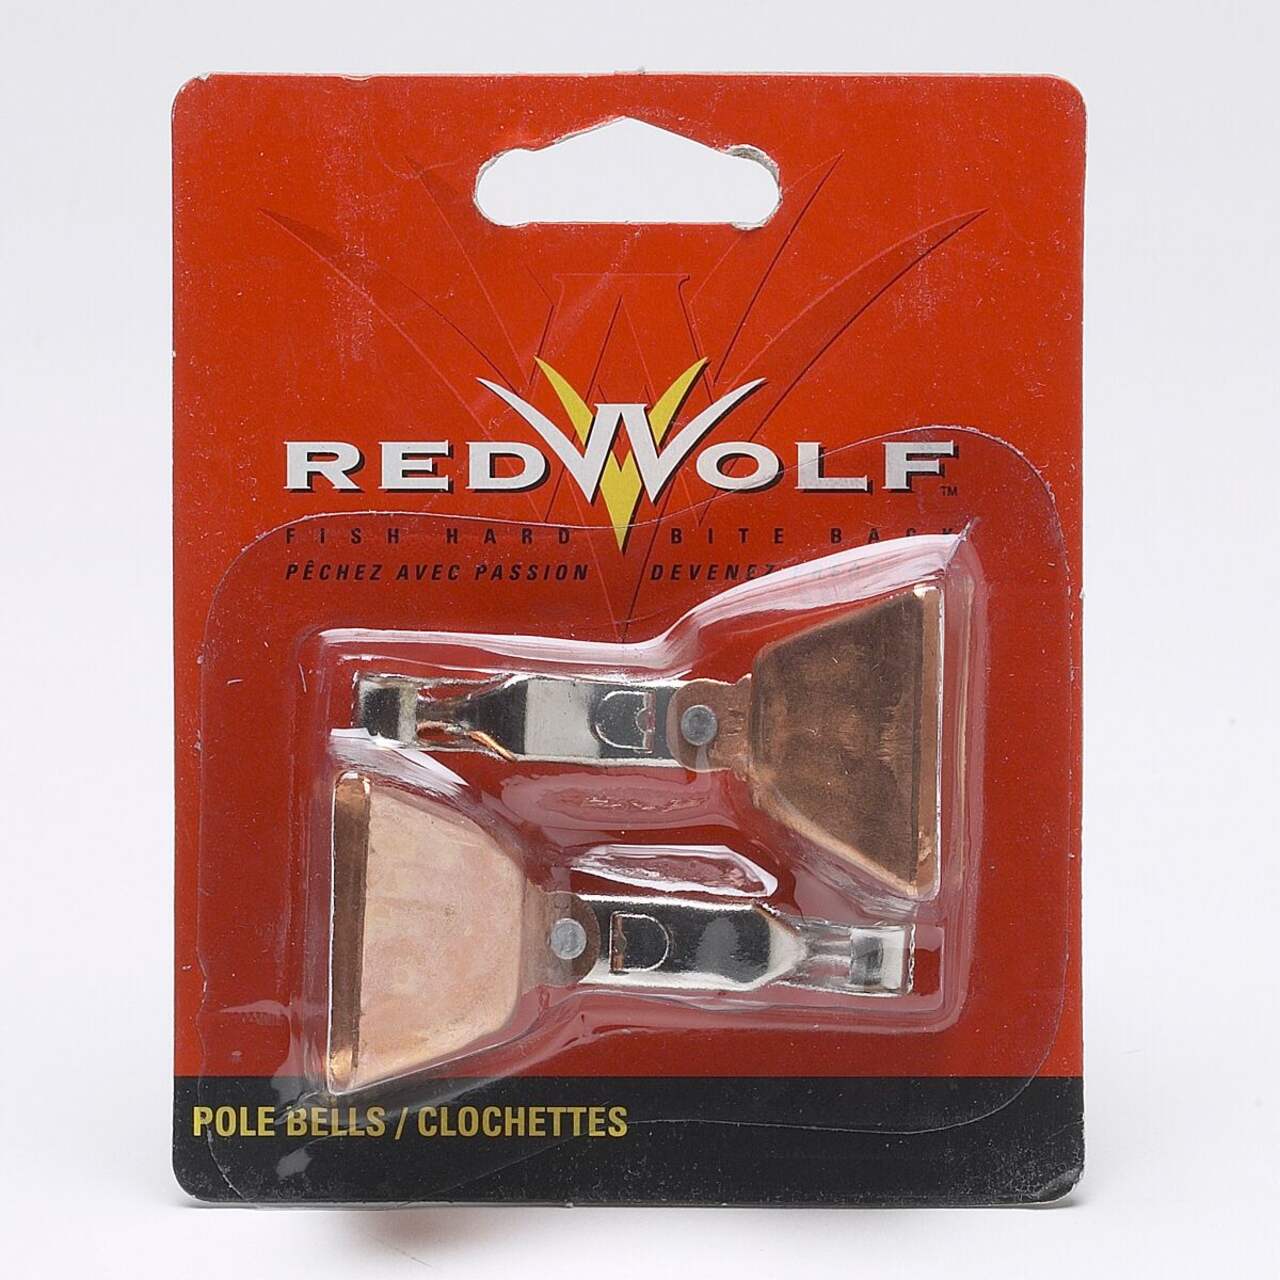 Red Wolf Value Monofilament Fishing Line - Canadian Tire, Montreal